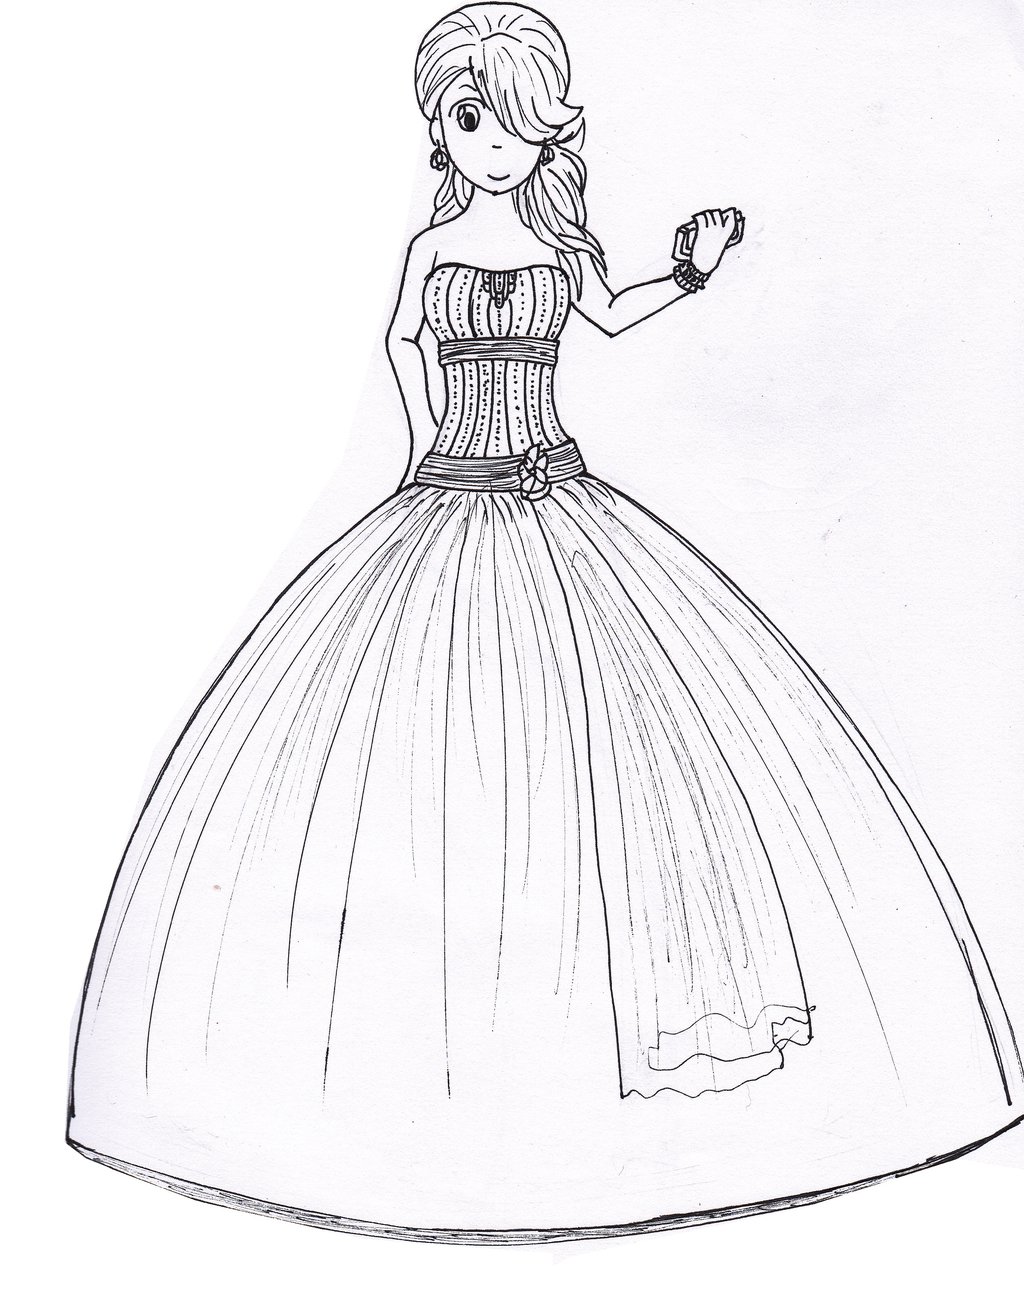 ball gown prom dress sketches | Explore